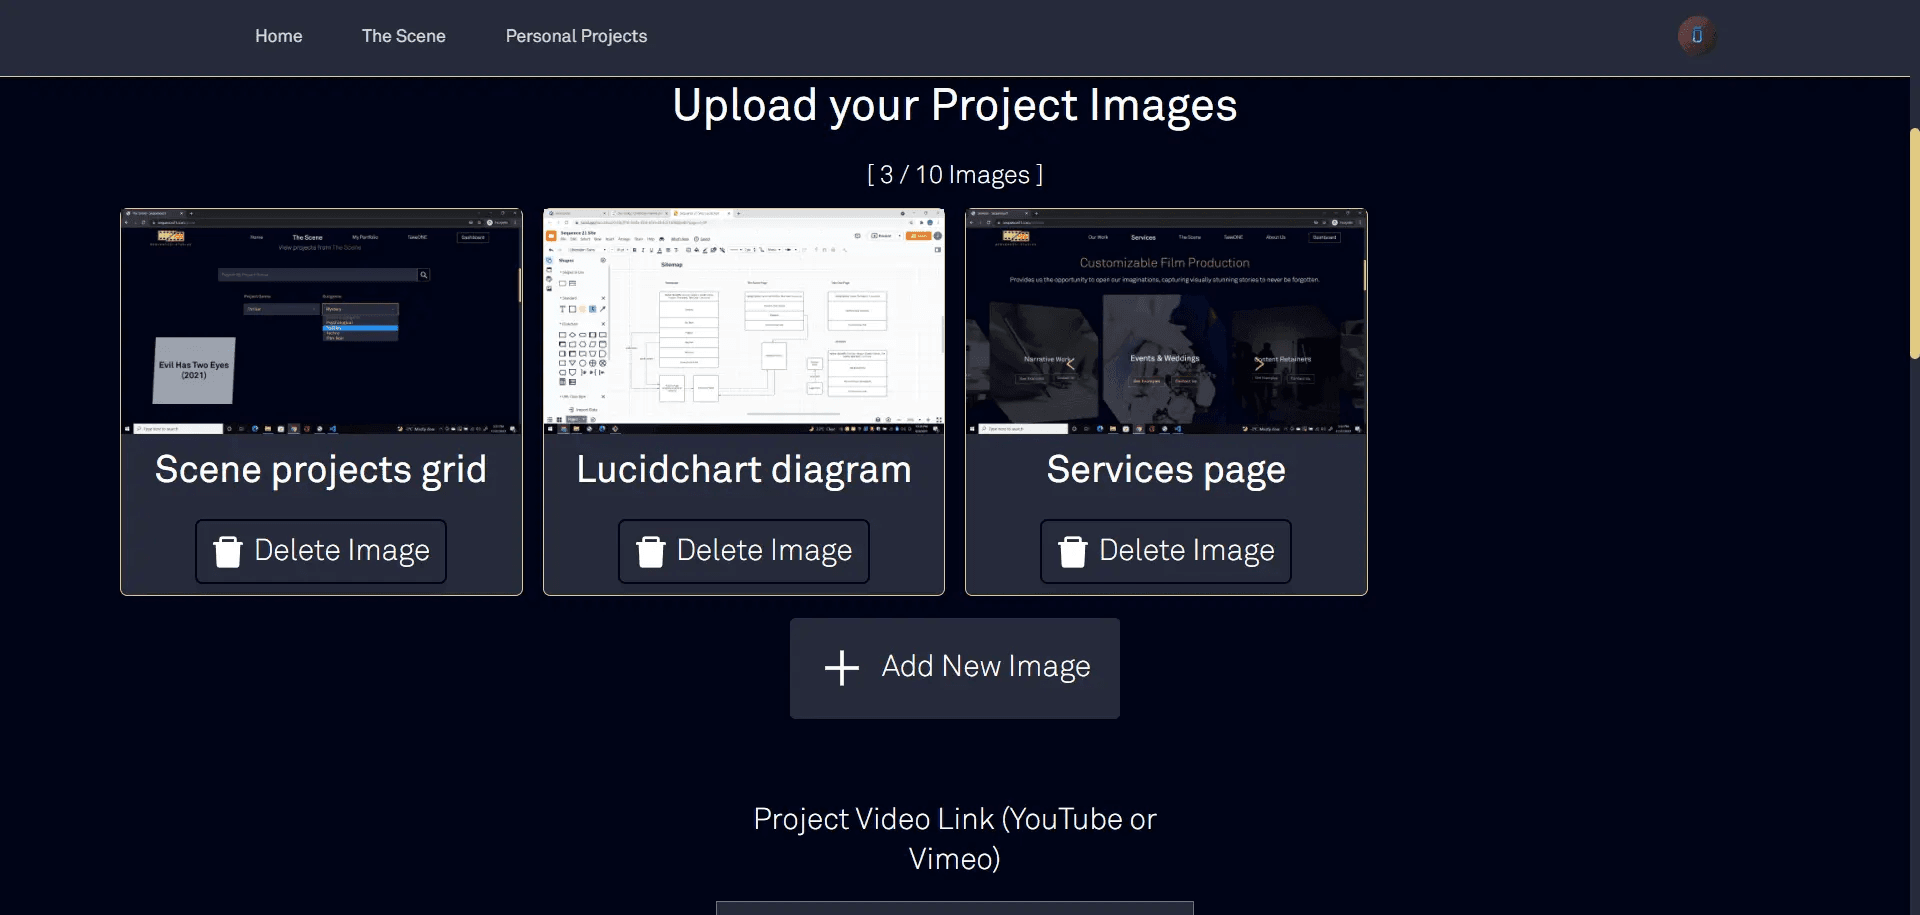 A project can have up to 10 custom images attached to it